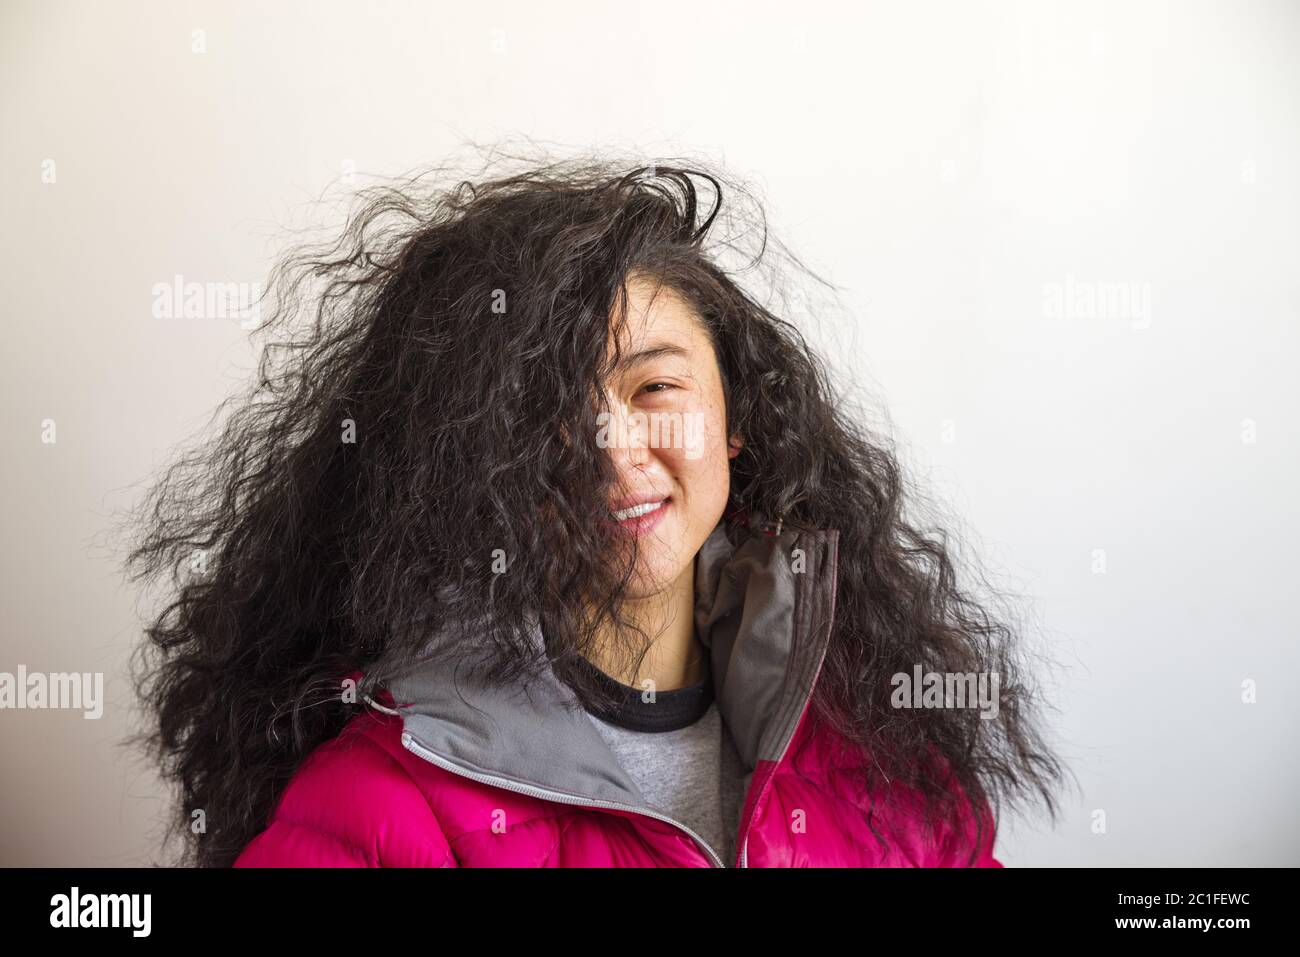 asian woman with crazy big wavy hair covering half her face Stock Photo